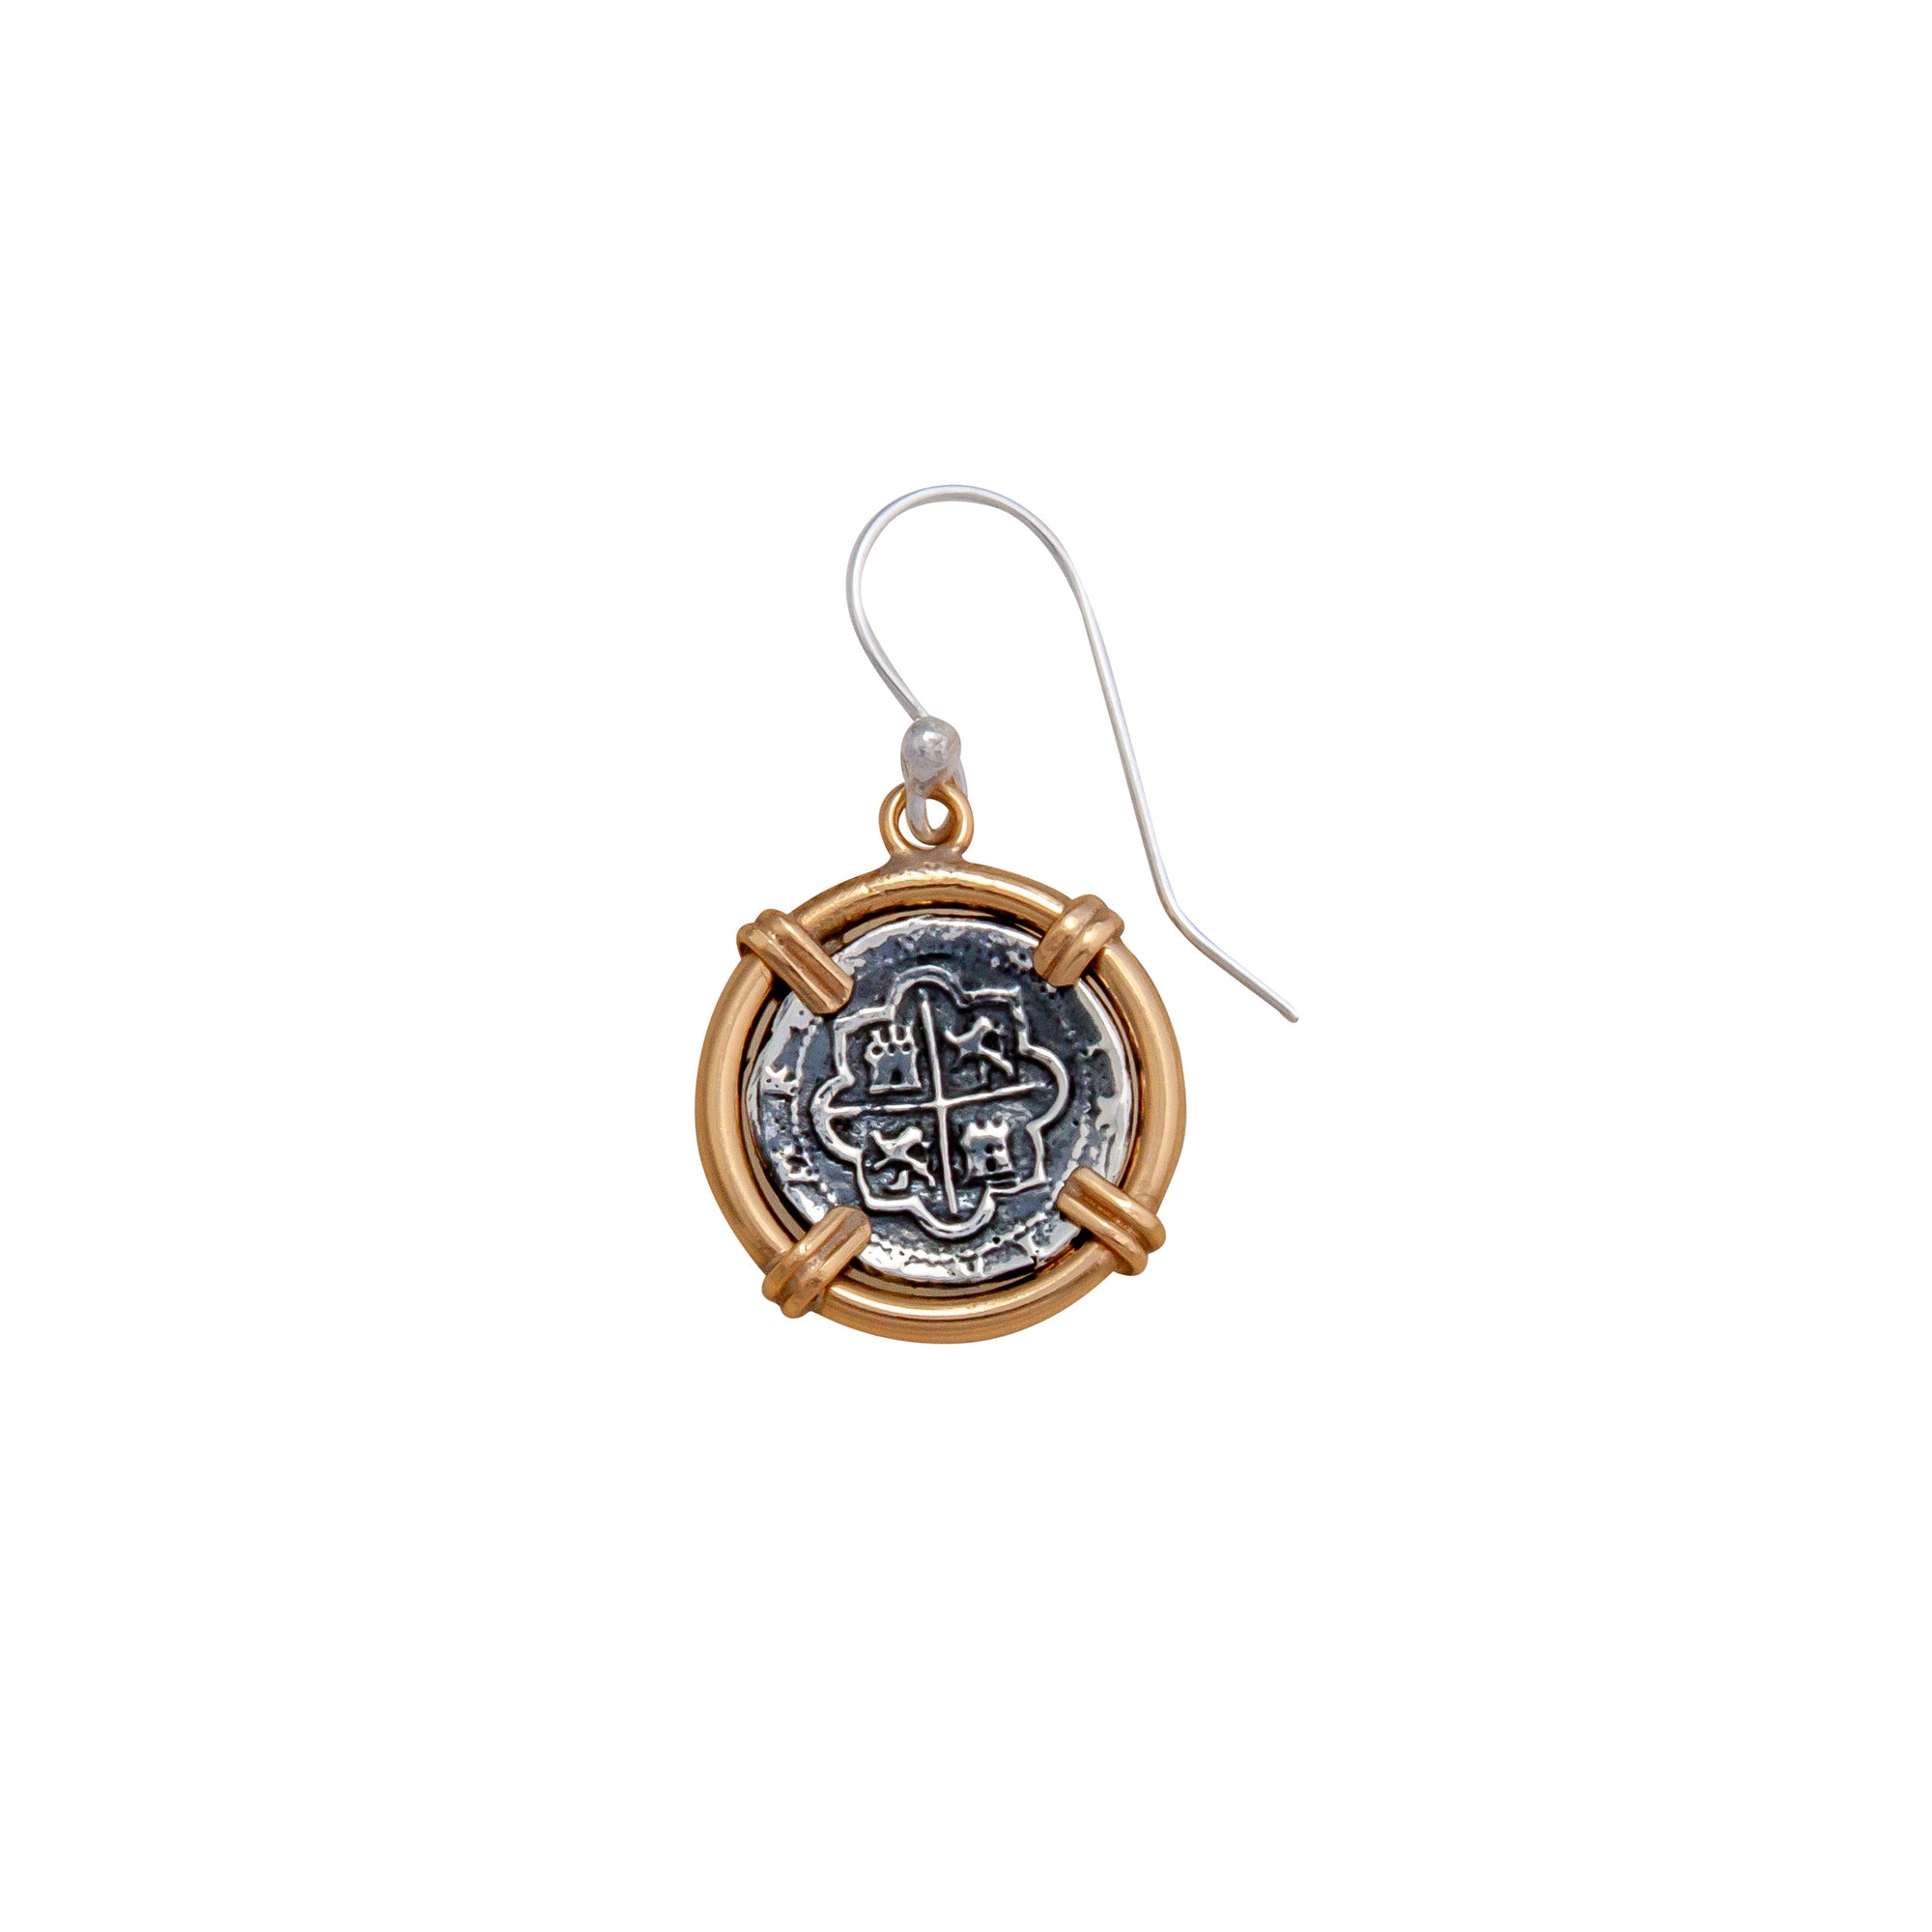 Sterling Silver and Alchemia Replica Spanish Coin Drop Earrings | Charles Albert Jewelry